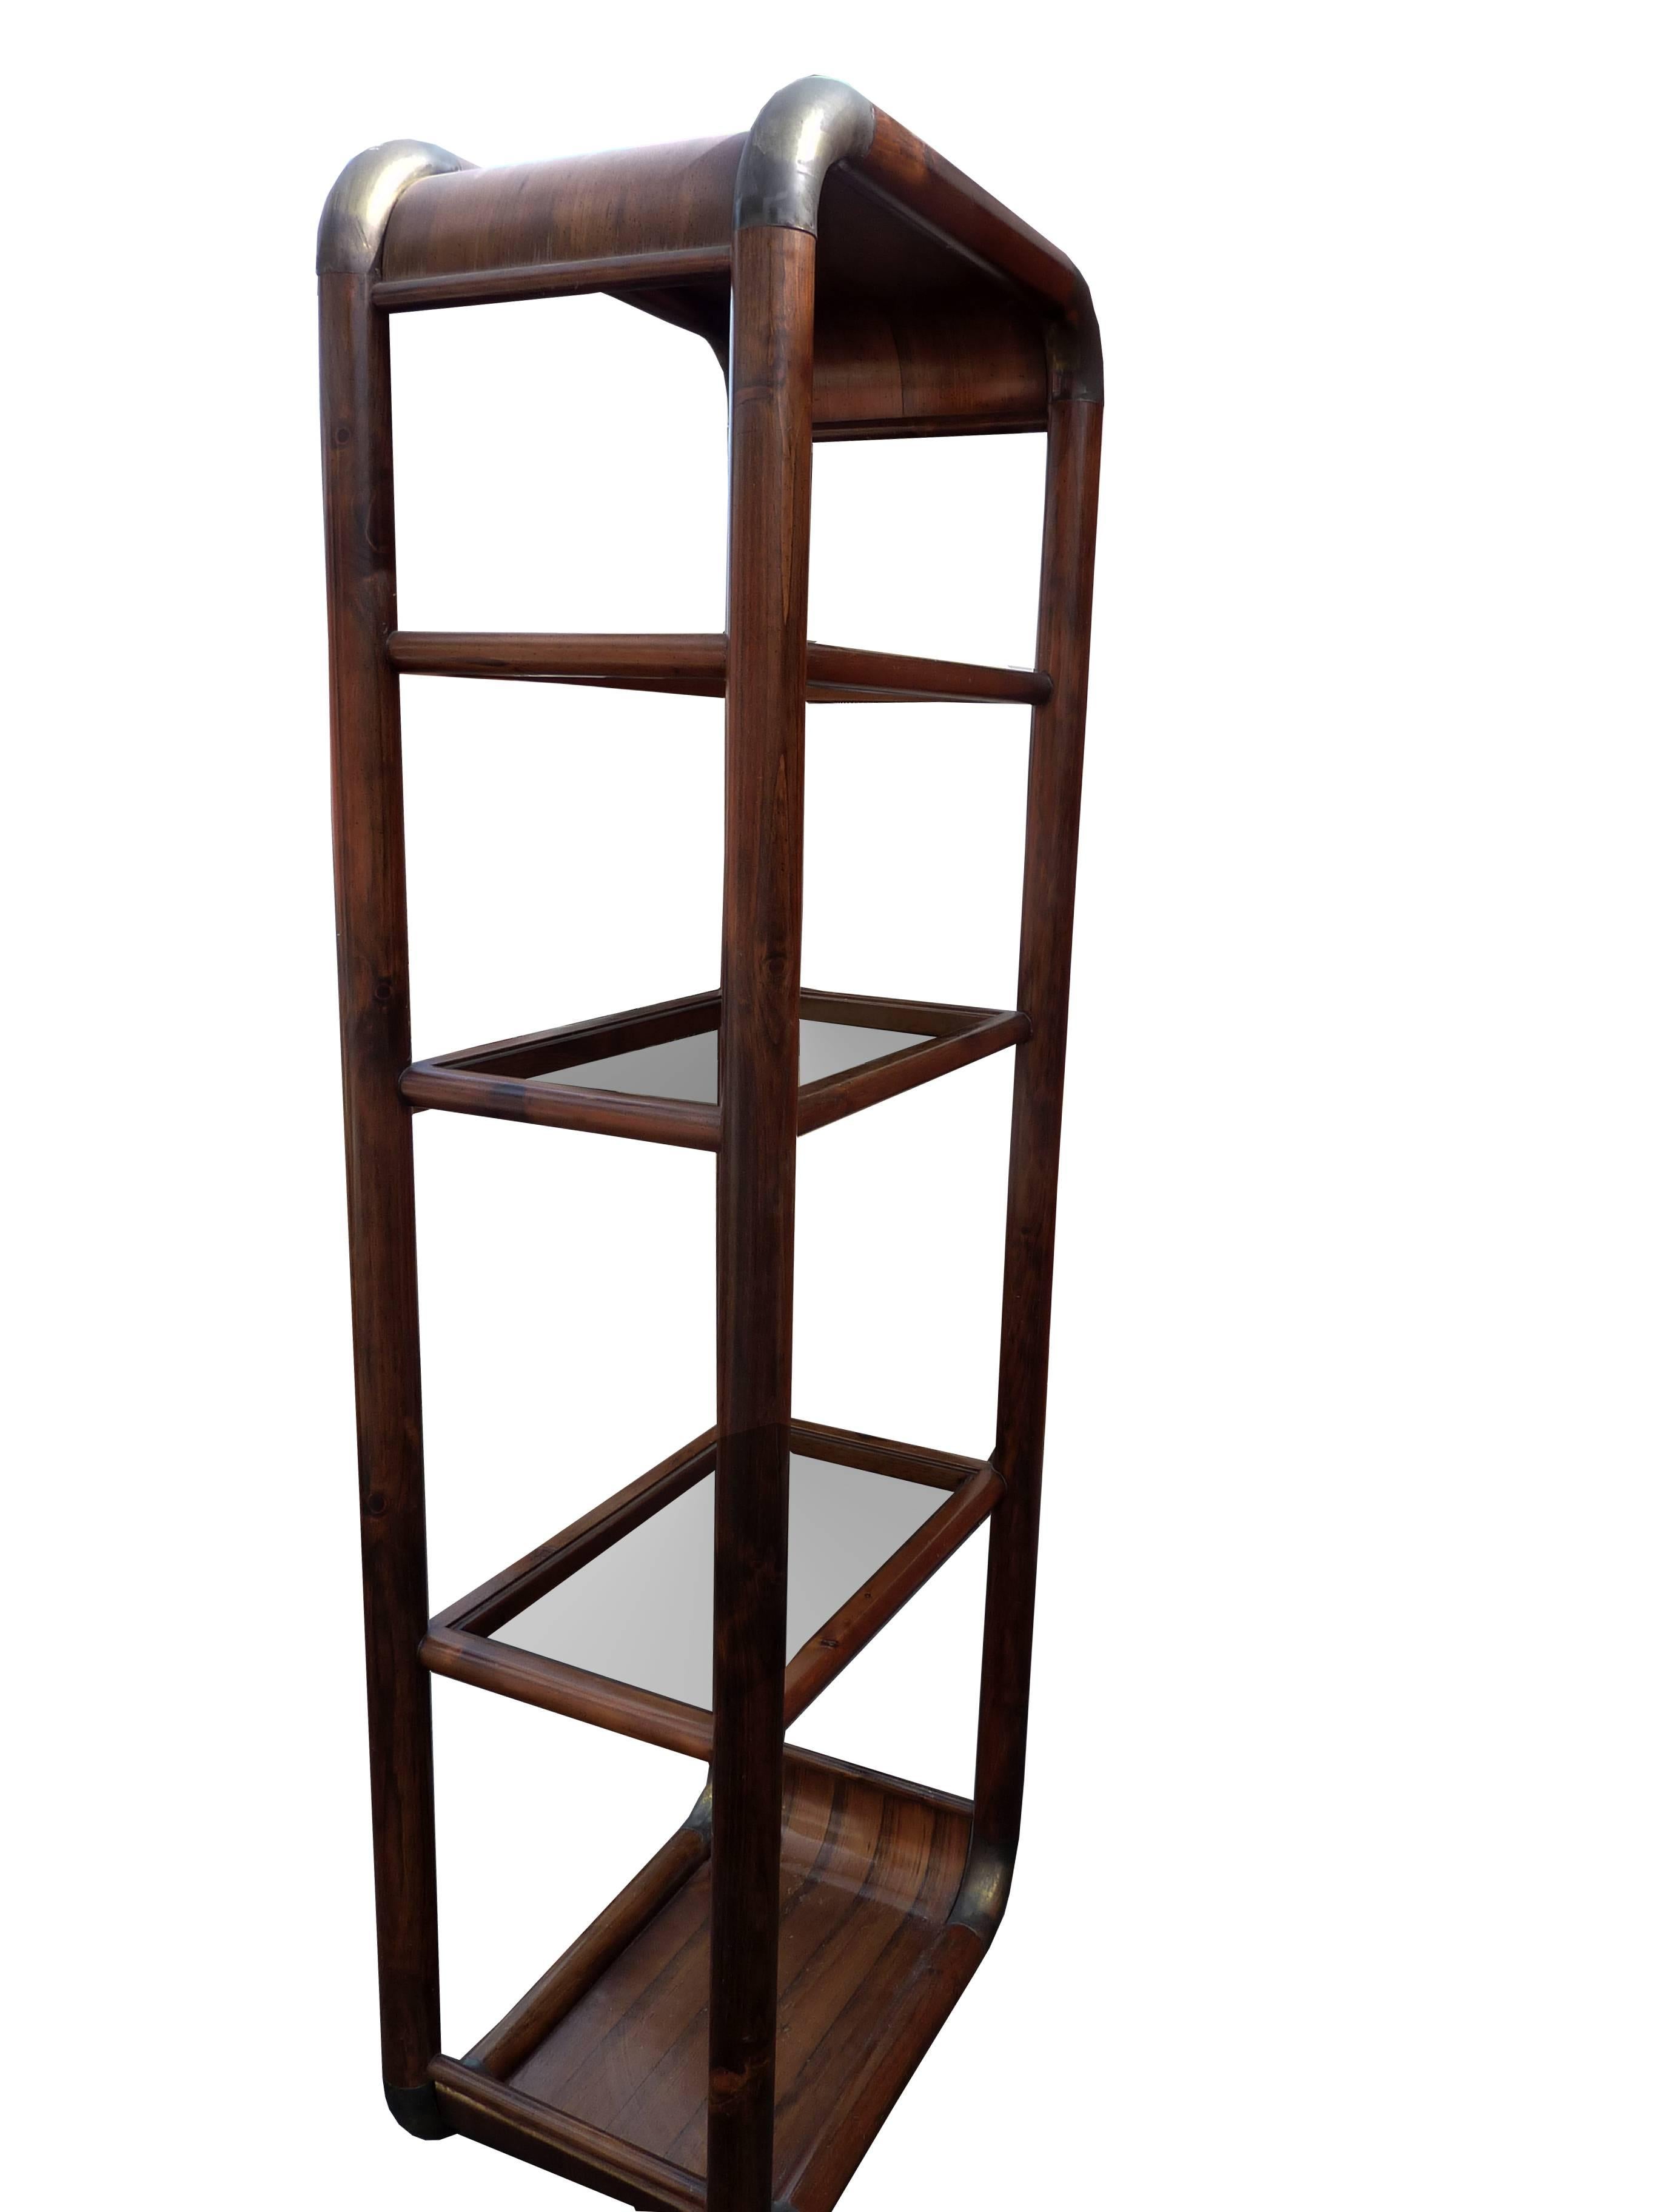 Stunning vintage Mid-Century etagere in walnut wood with handcrafted details brass in the corners and glass shelves.